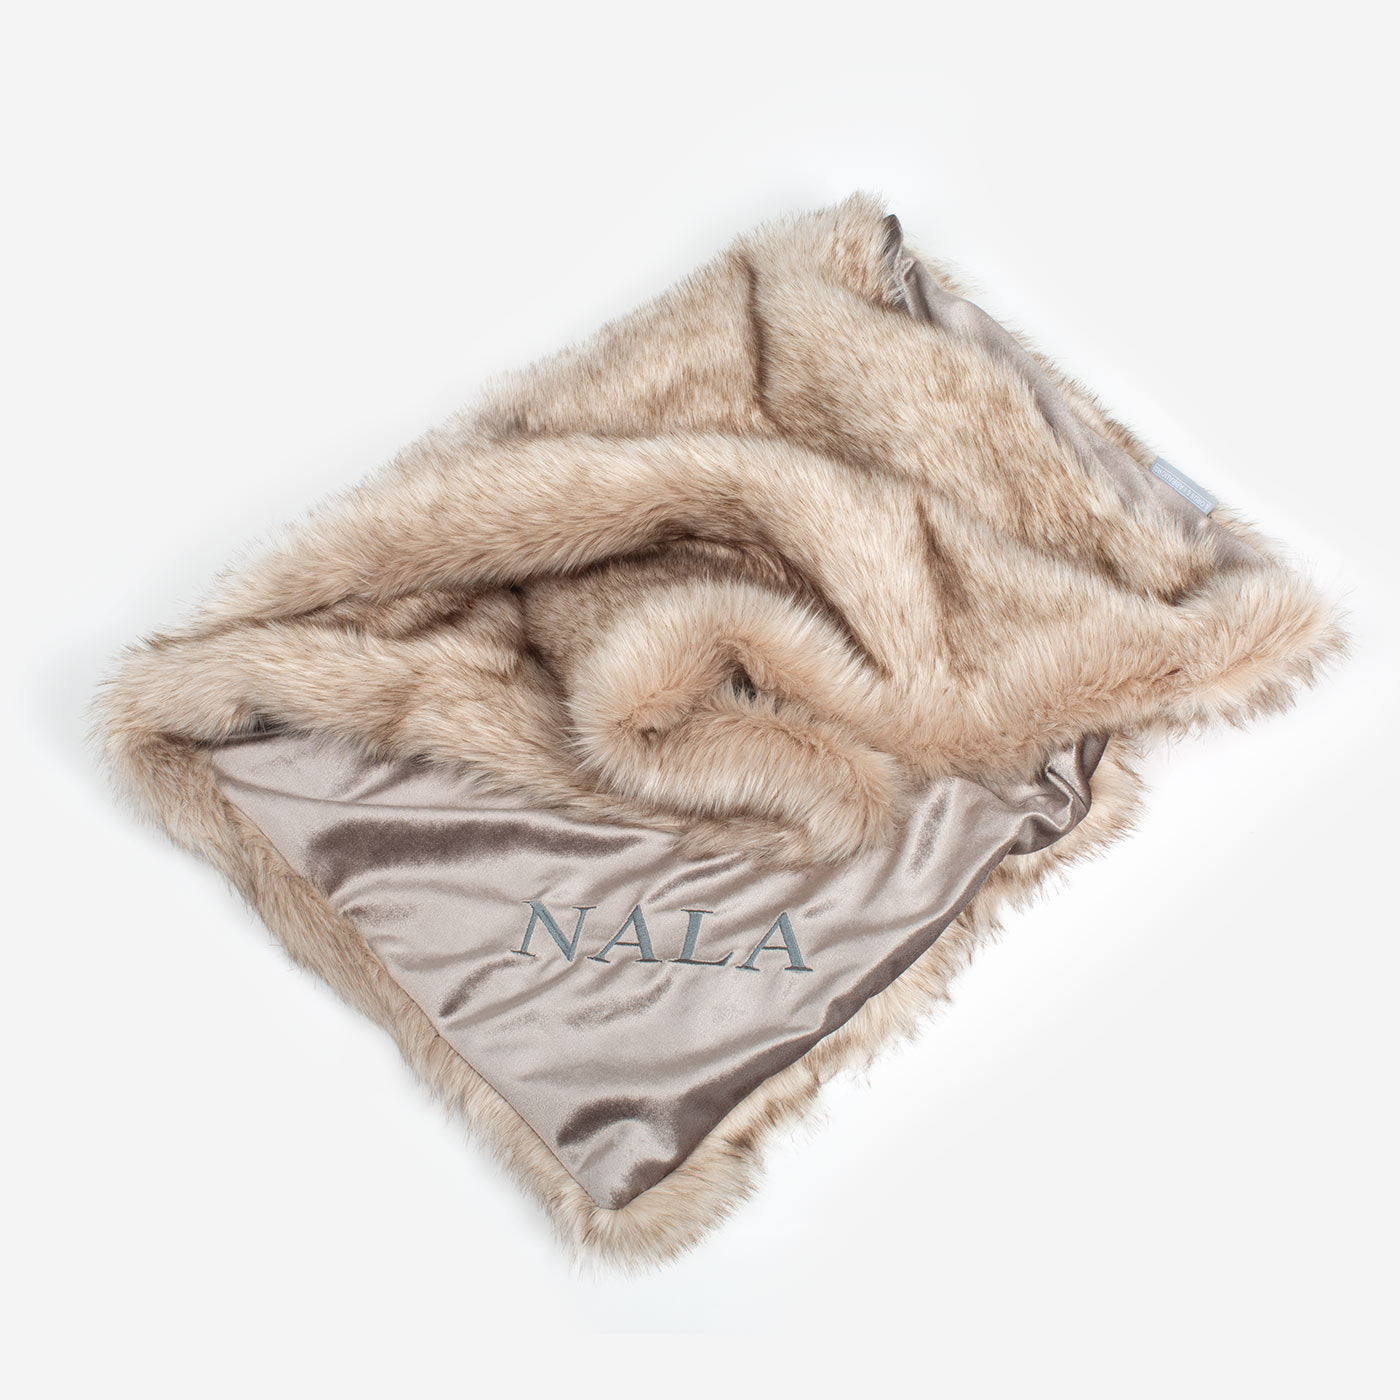 Luxury Velvet Pet Blanket, In Stunning Mink & Siberian Faux Fur The Perfect Blanket For Dogs, Available To Personalize at Lords & Labradors US